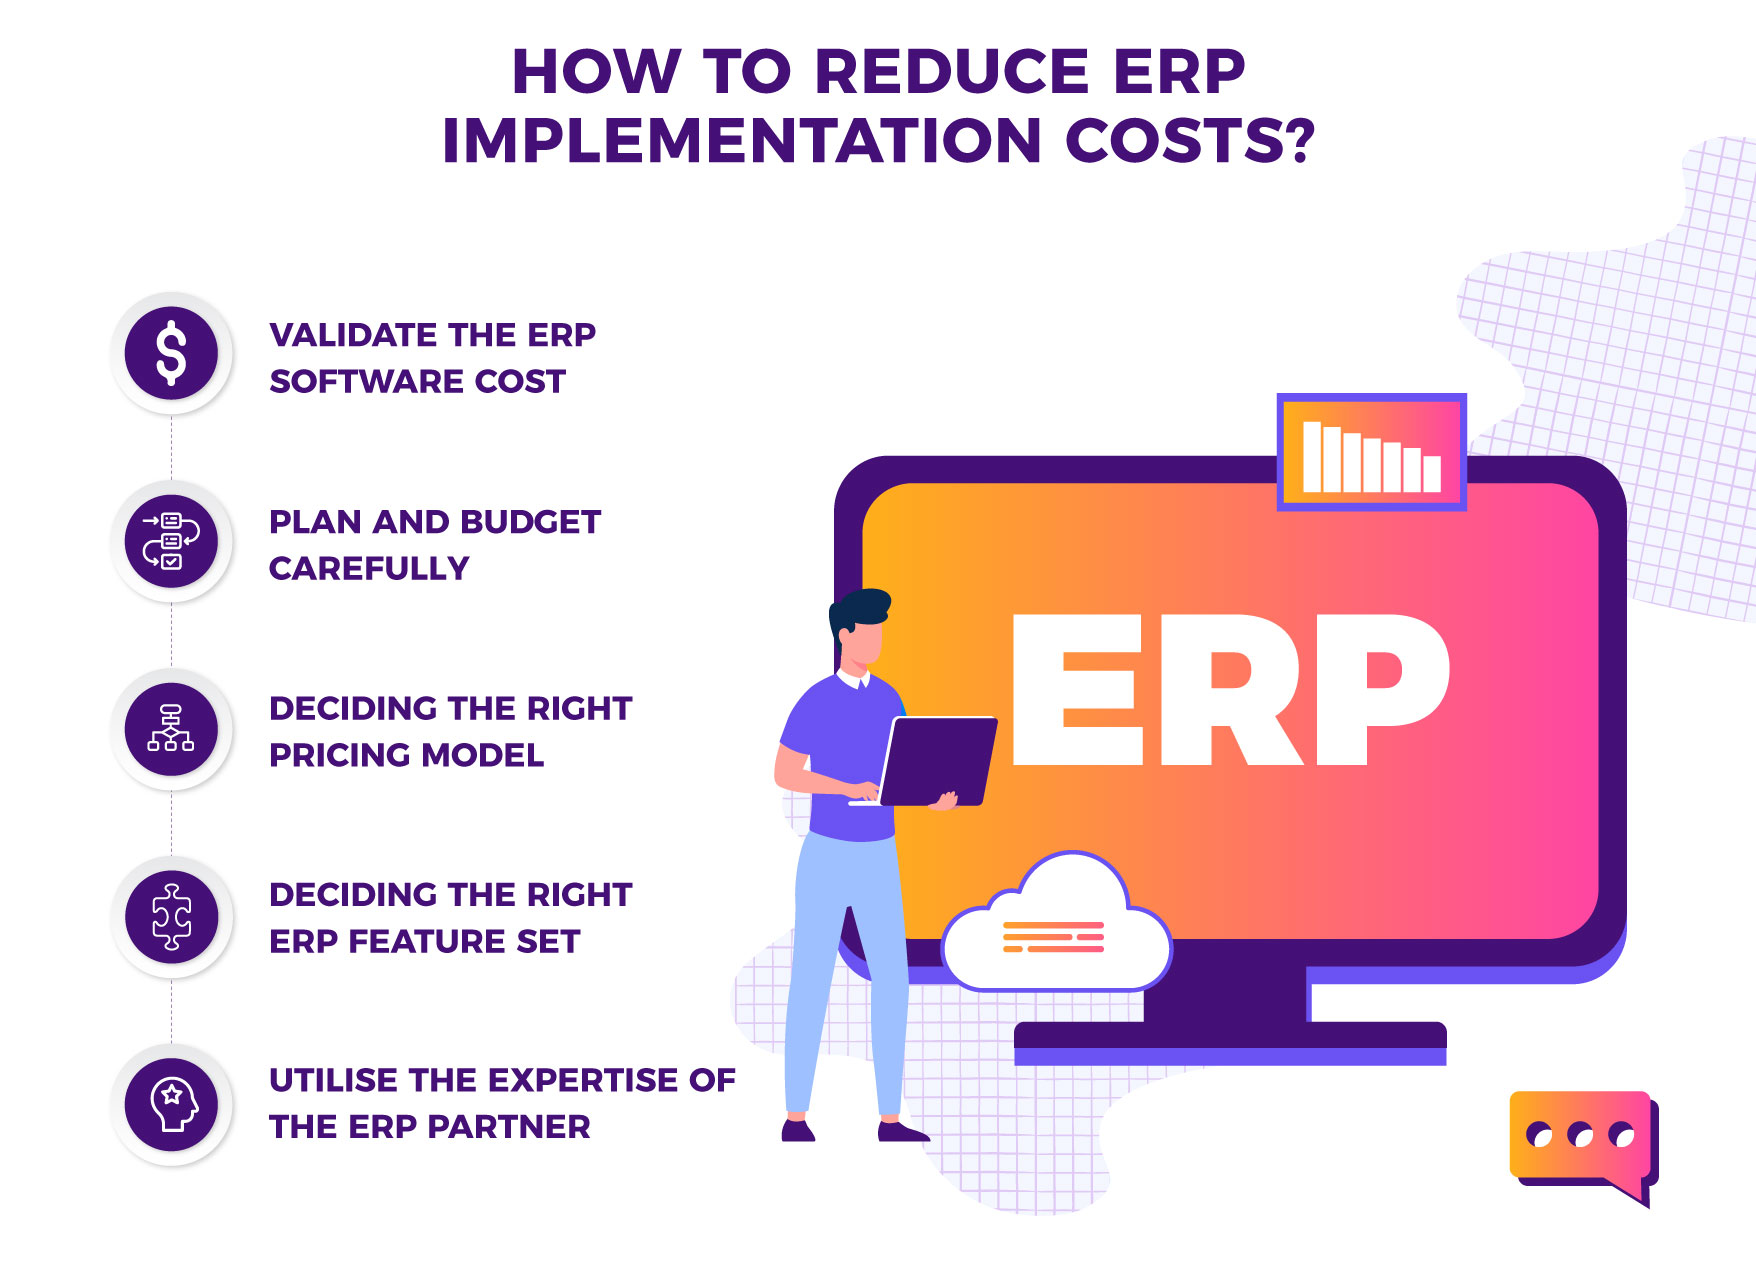 How to Reduce ERP Implementation Costs? 